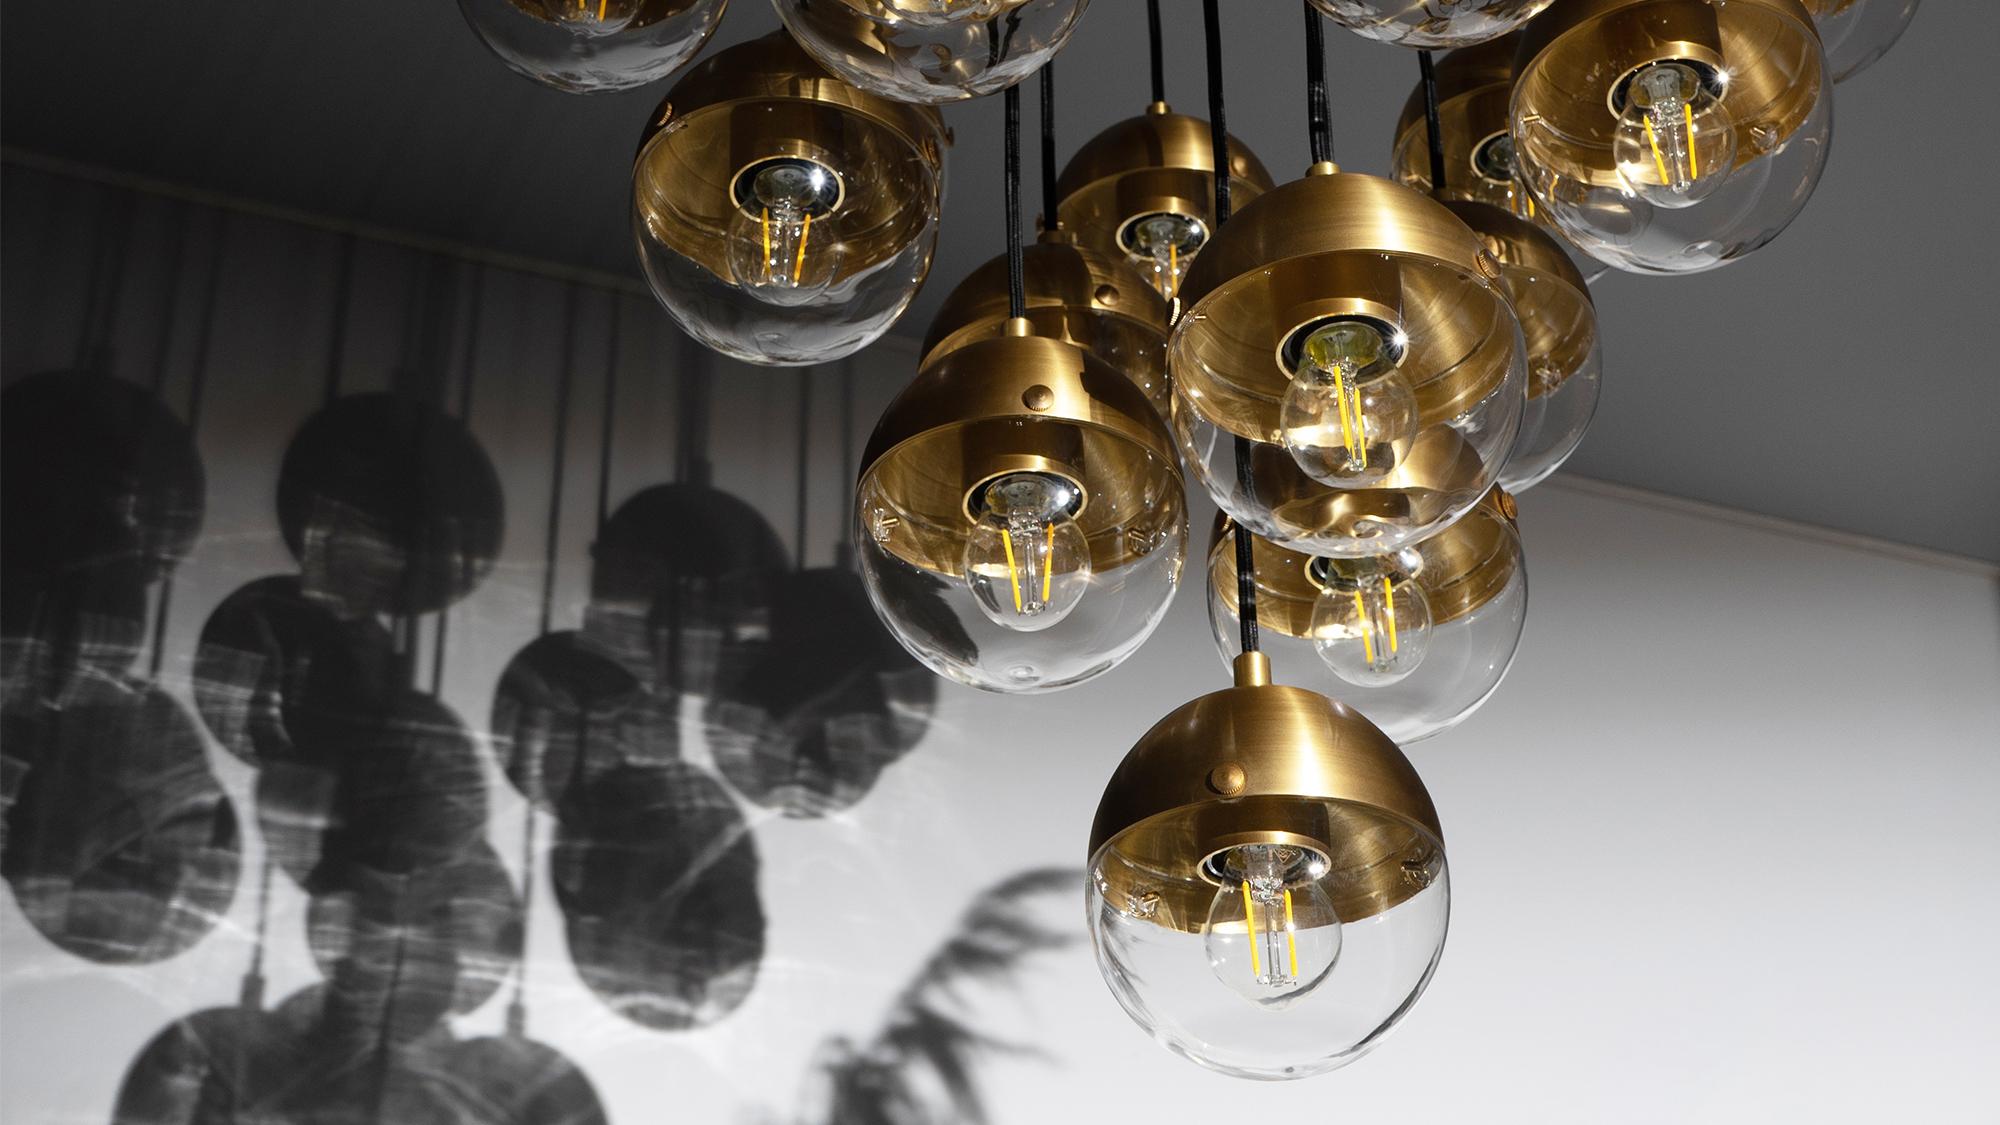 This hovering assemblage of radiating elements glimmers with vital energy. Inspired by elemental shapes, nineteen half globes emit an atmospheric light, anchored to a circular brass plate.

Available in our three signature finishes: Lacquered